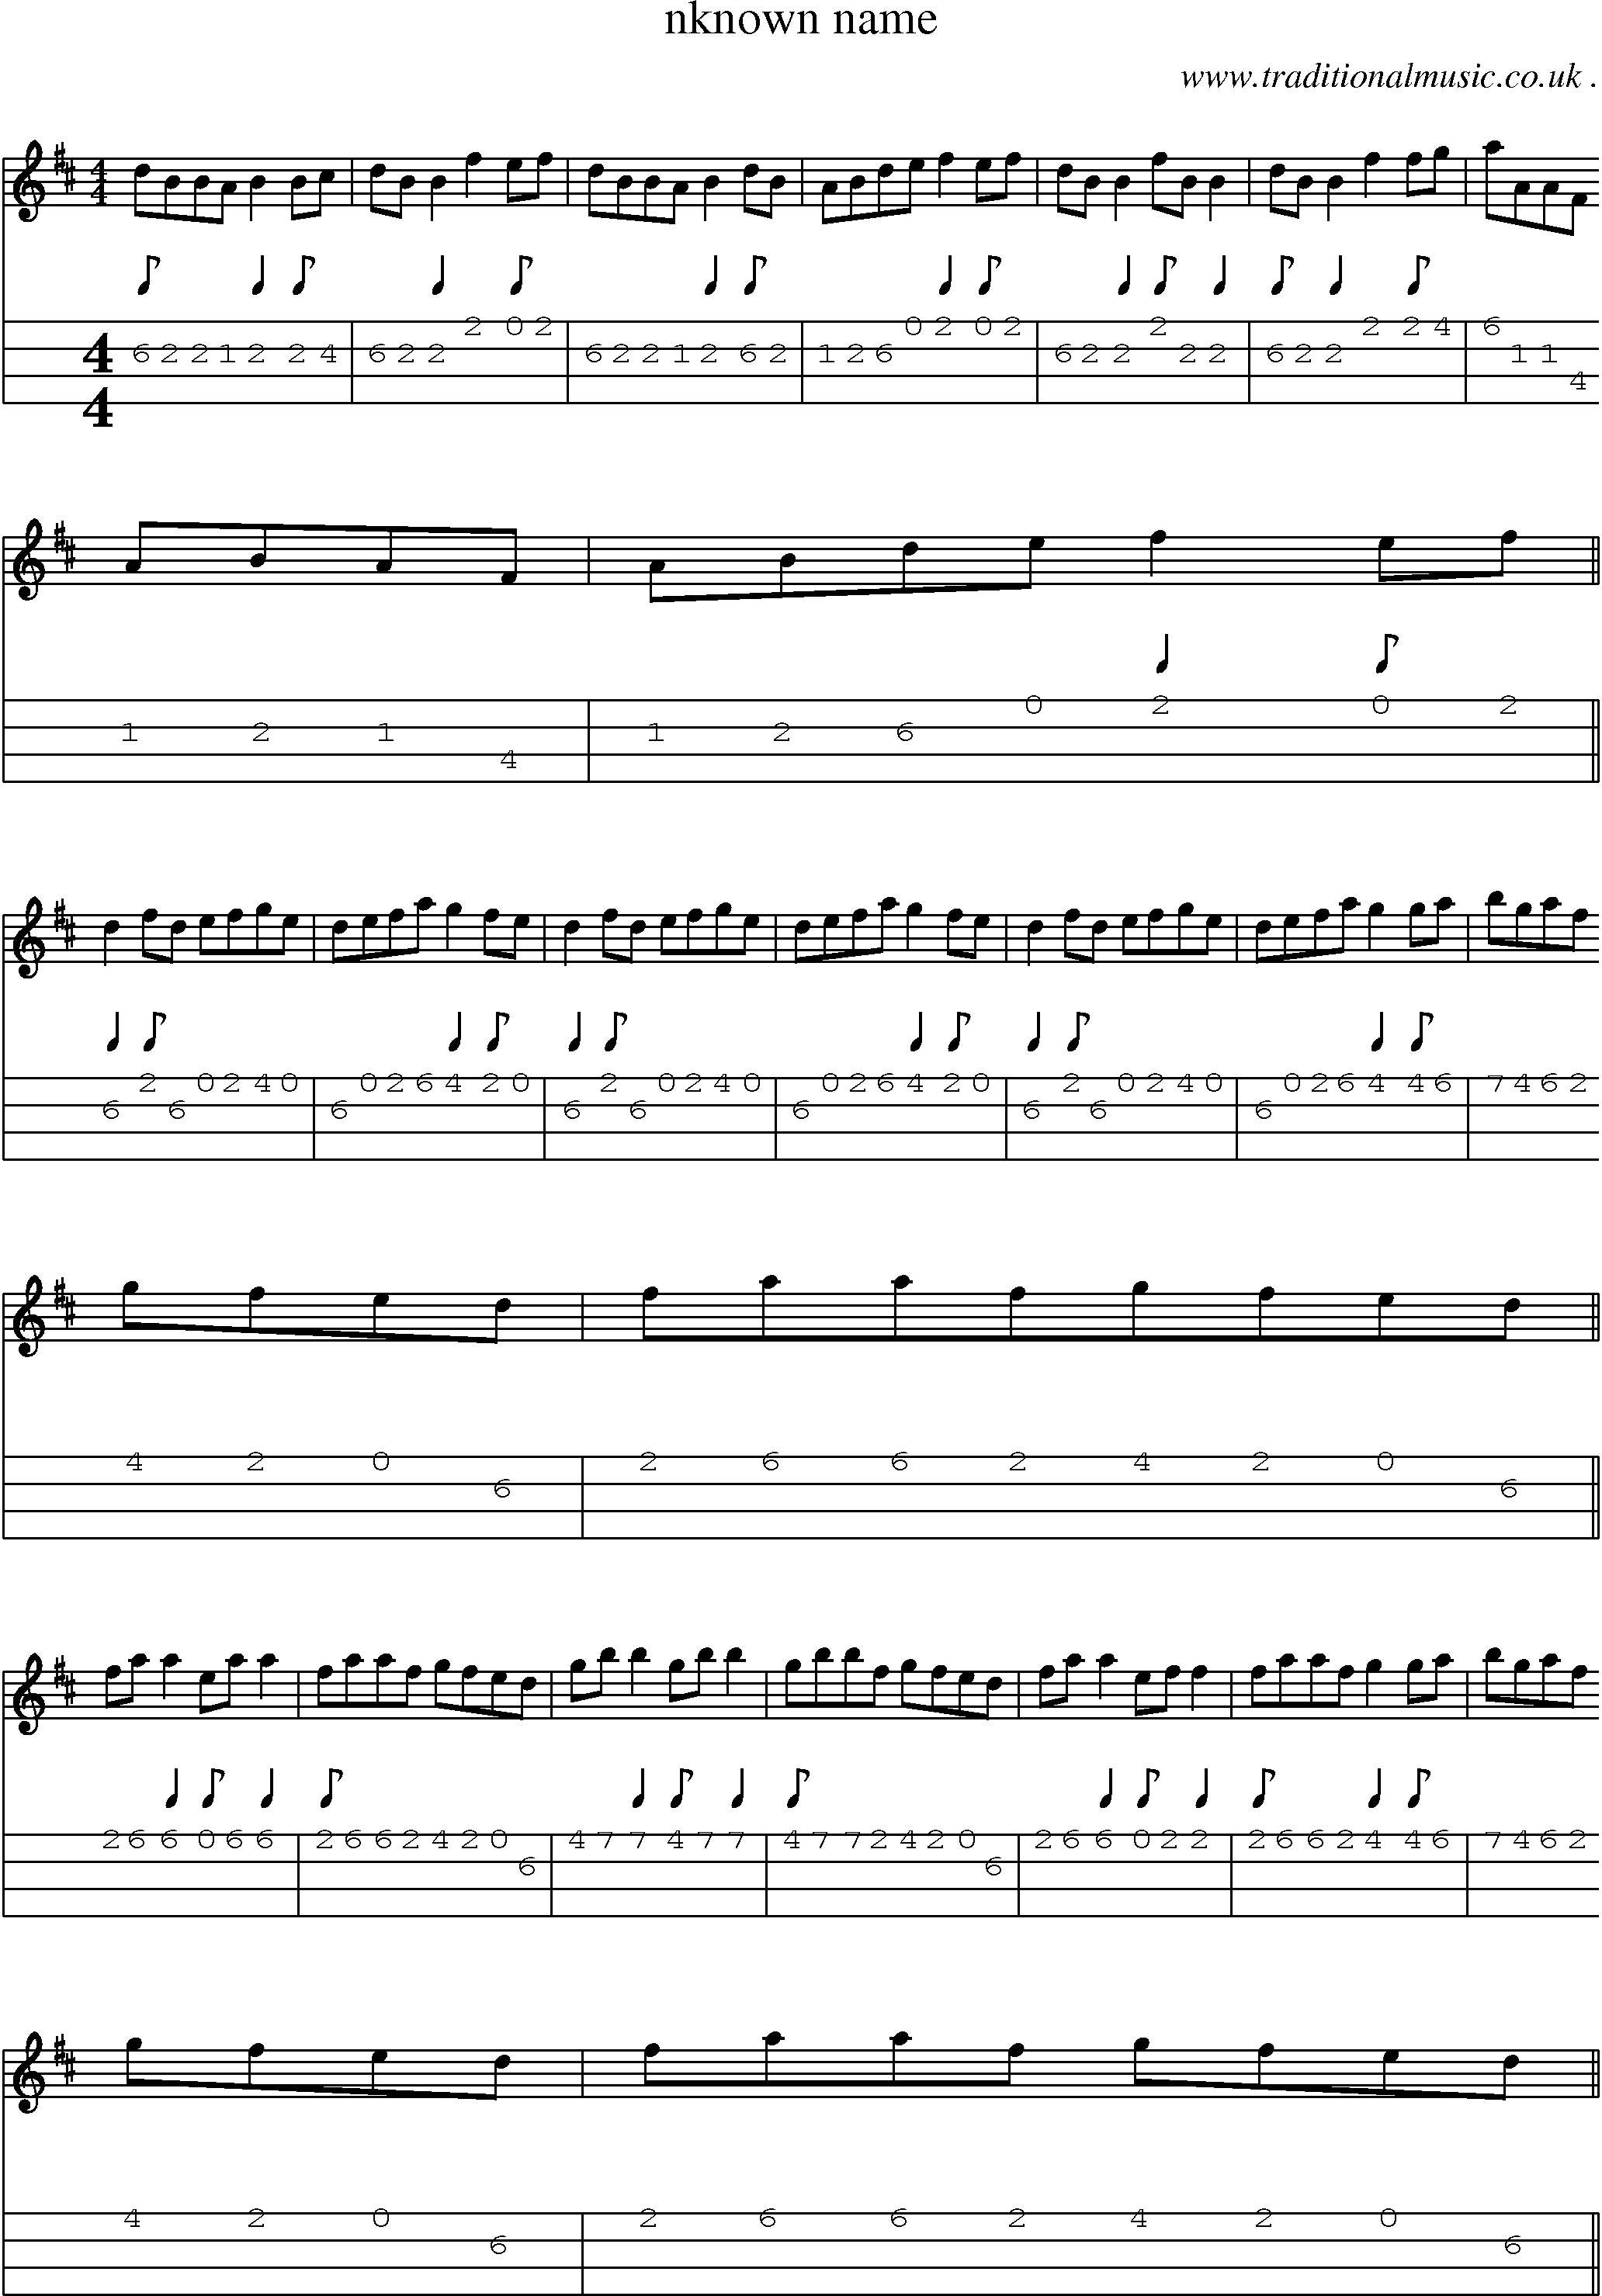 Sheet-Music and Mandolin Tabs for Nknown Name